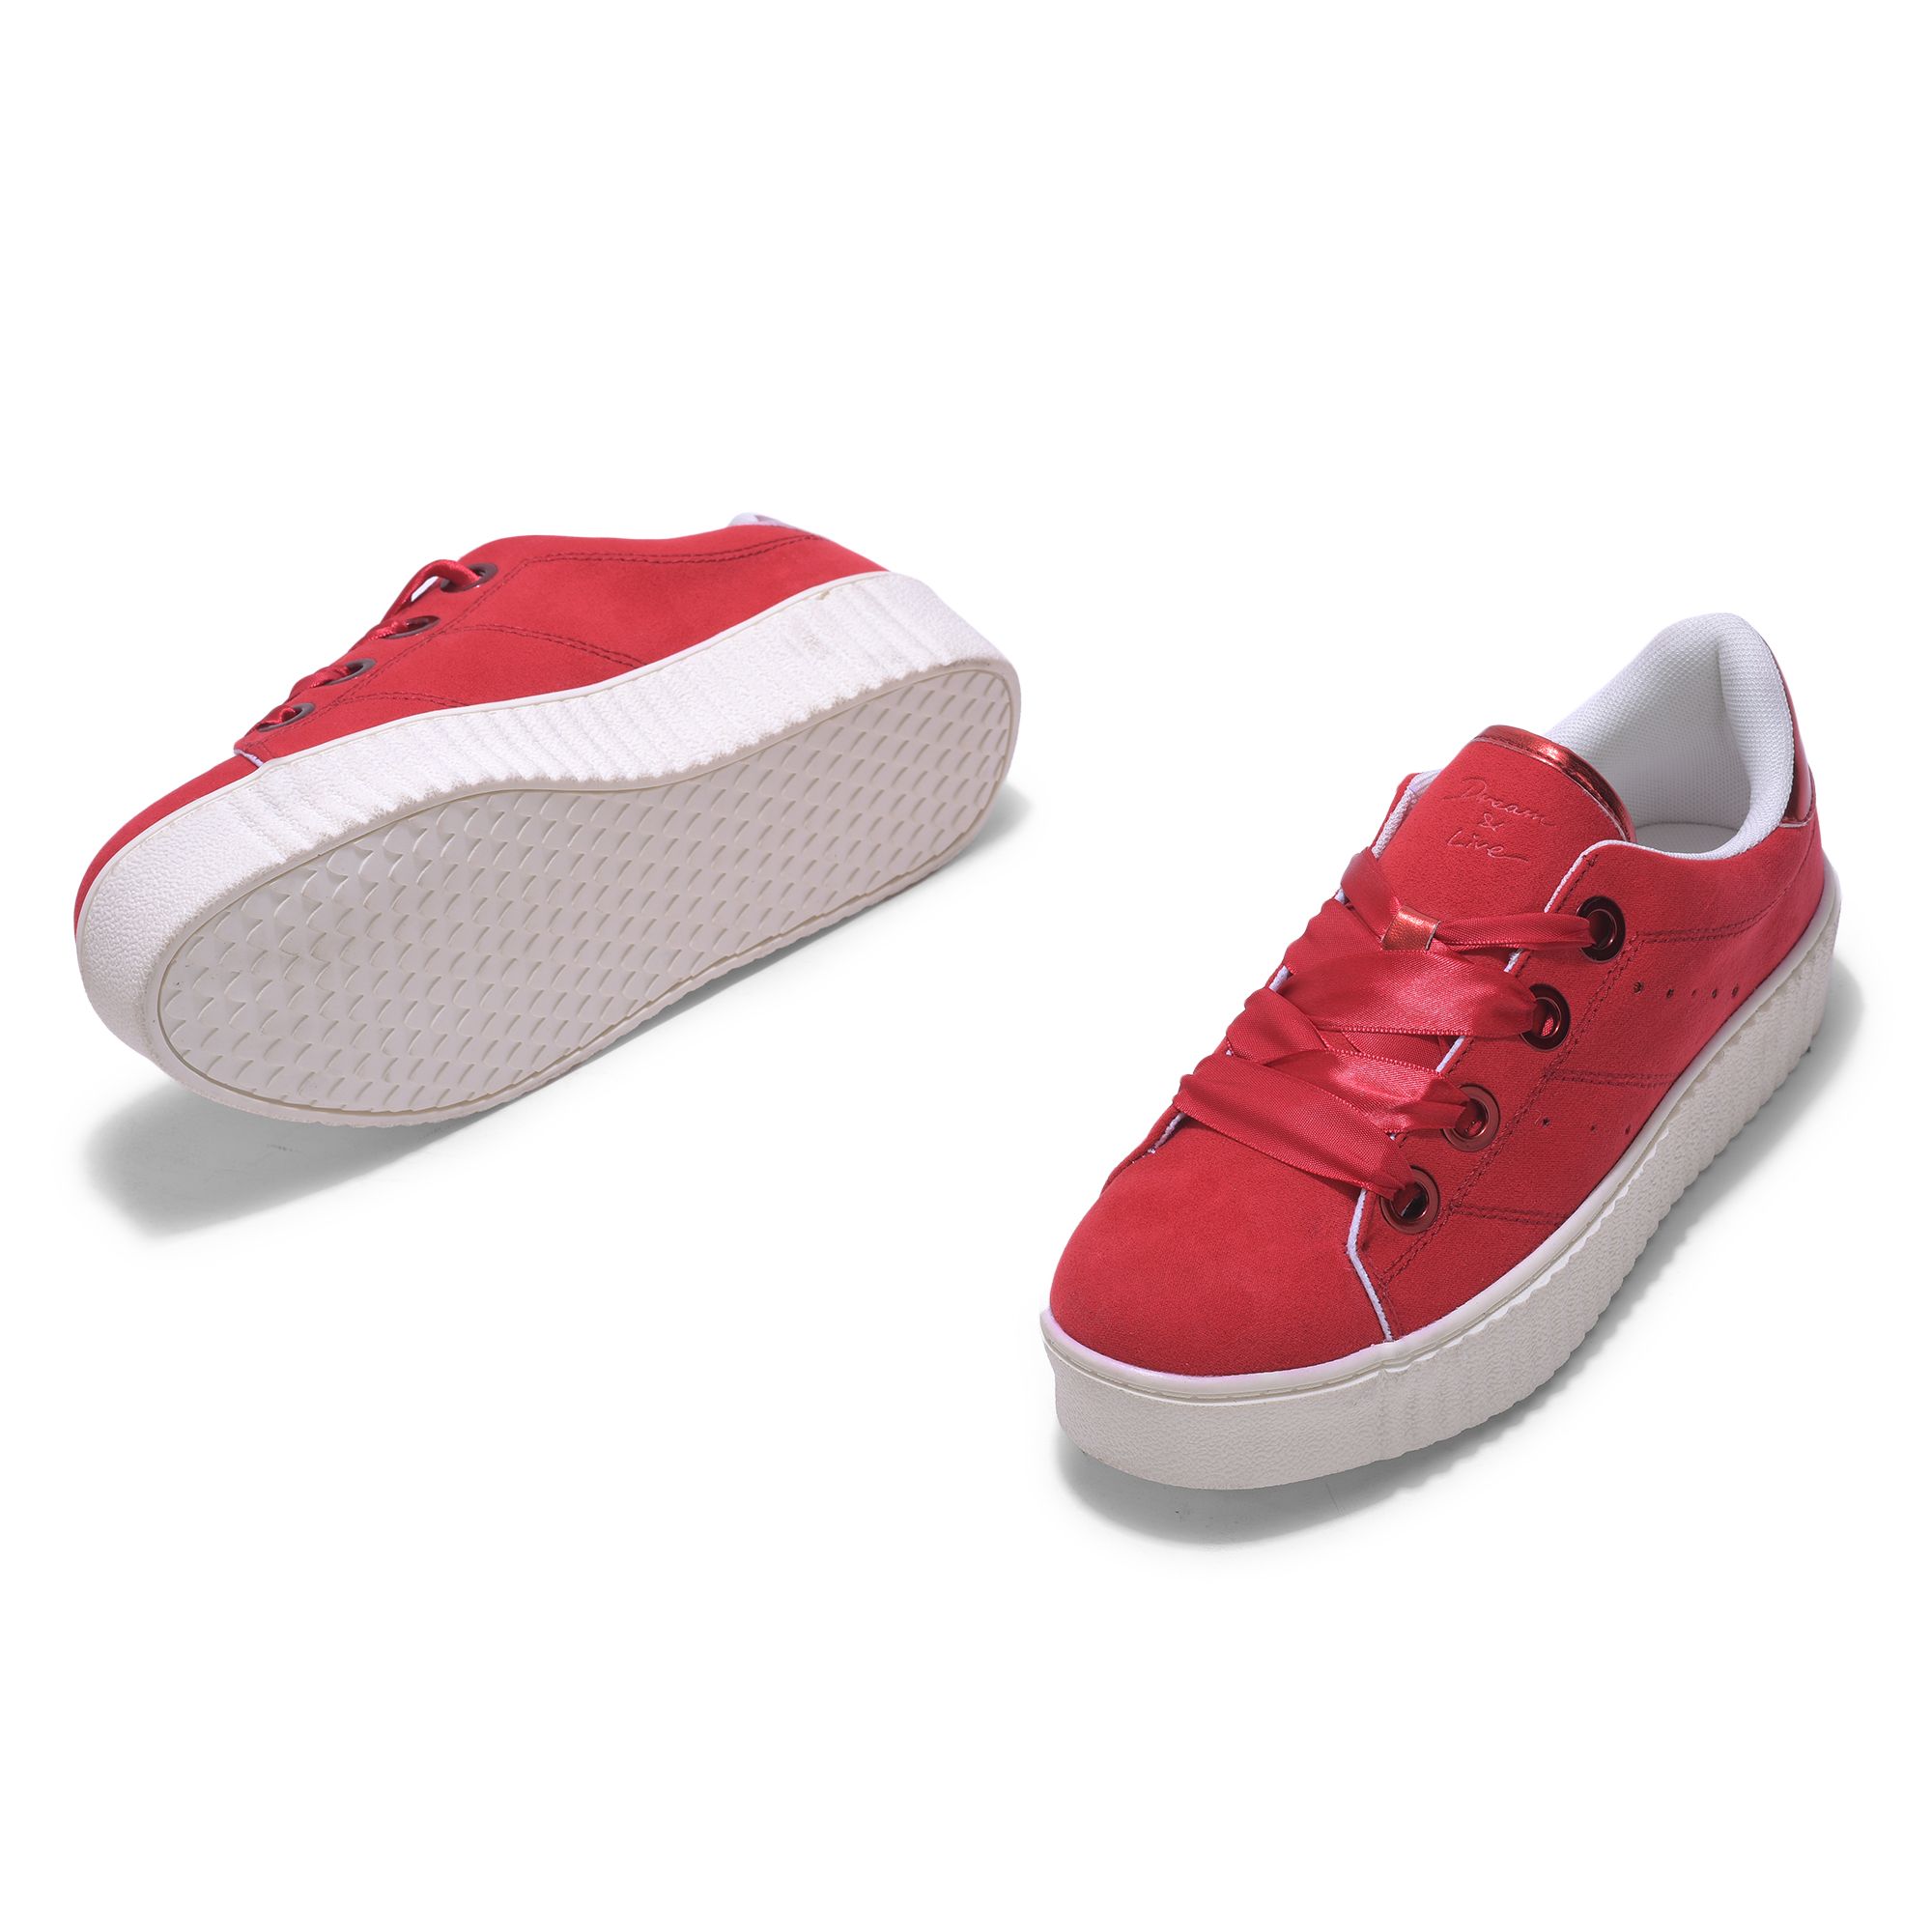 Red casual sneakers